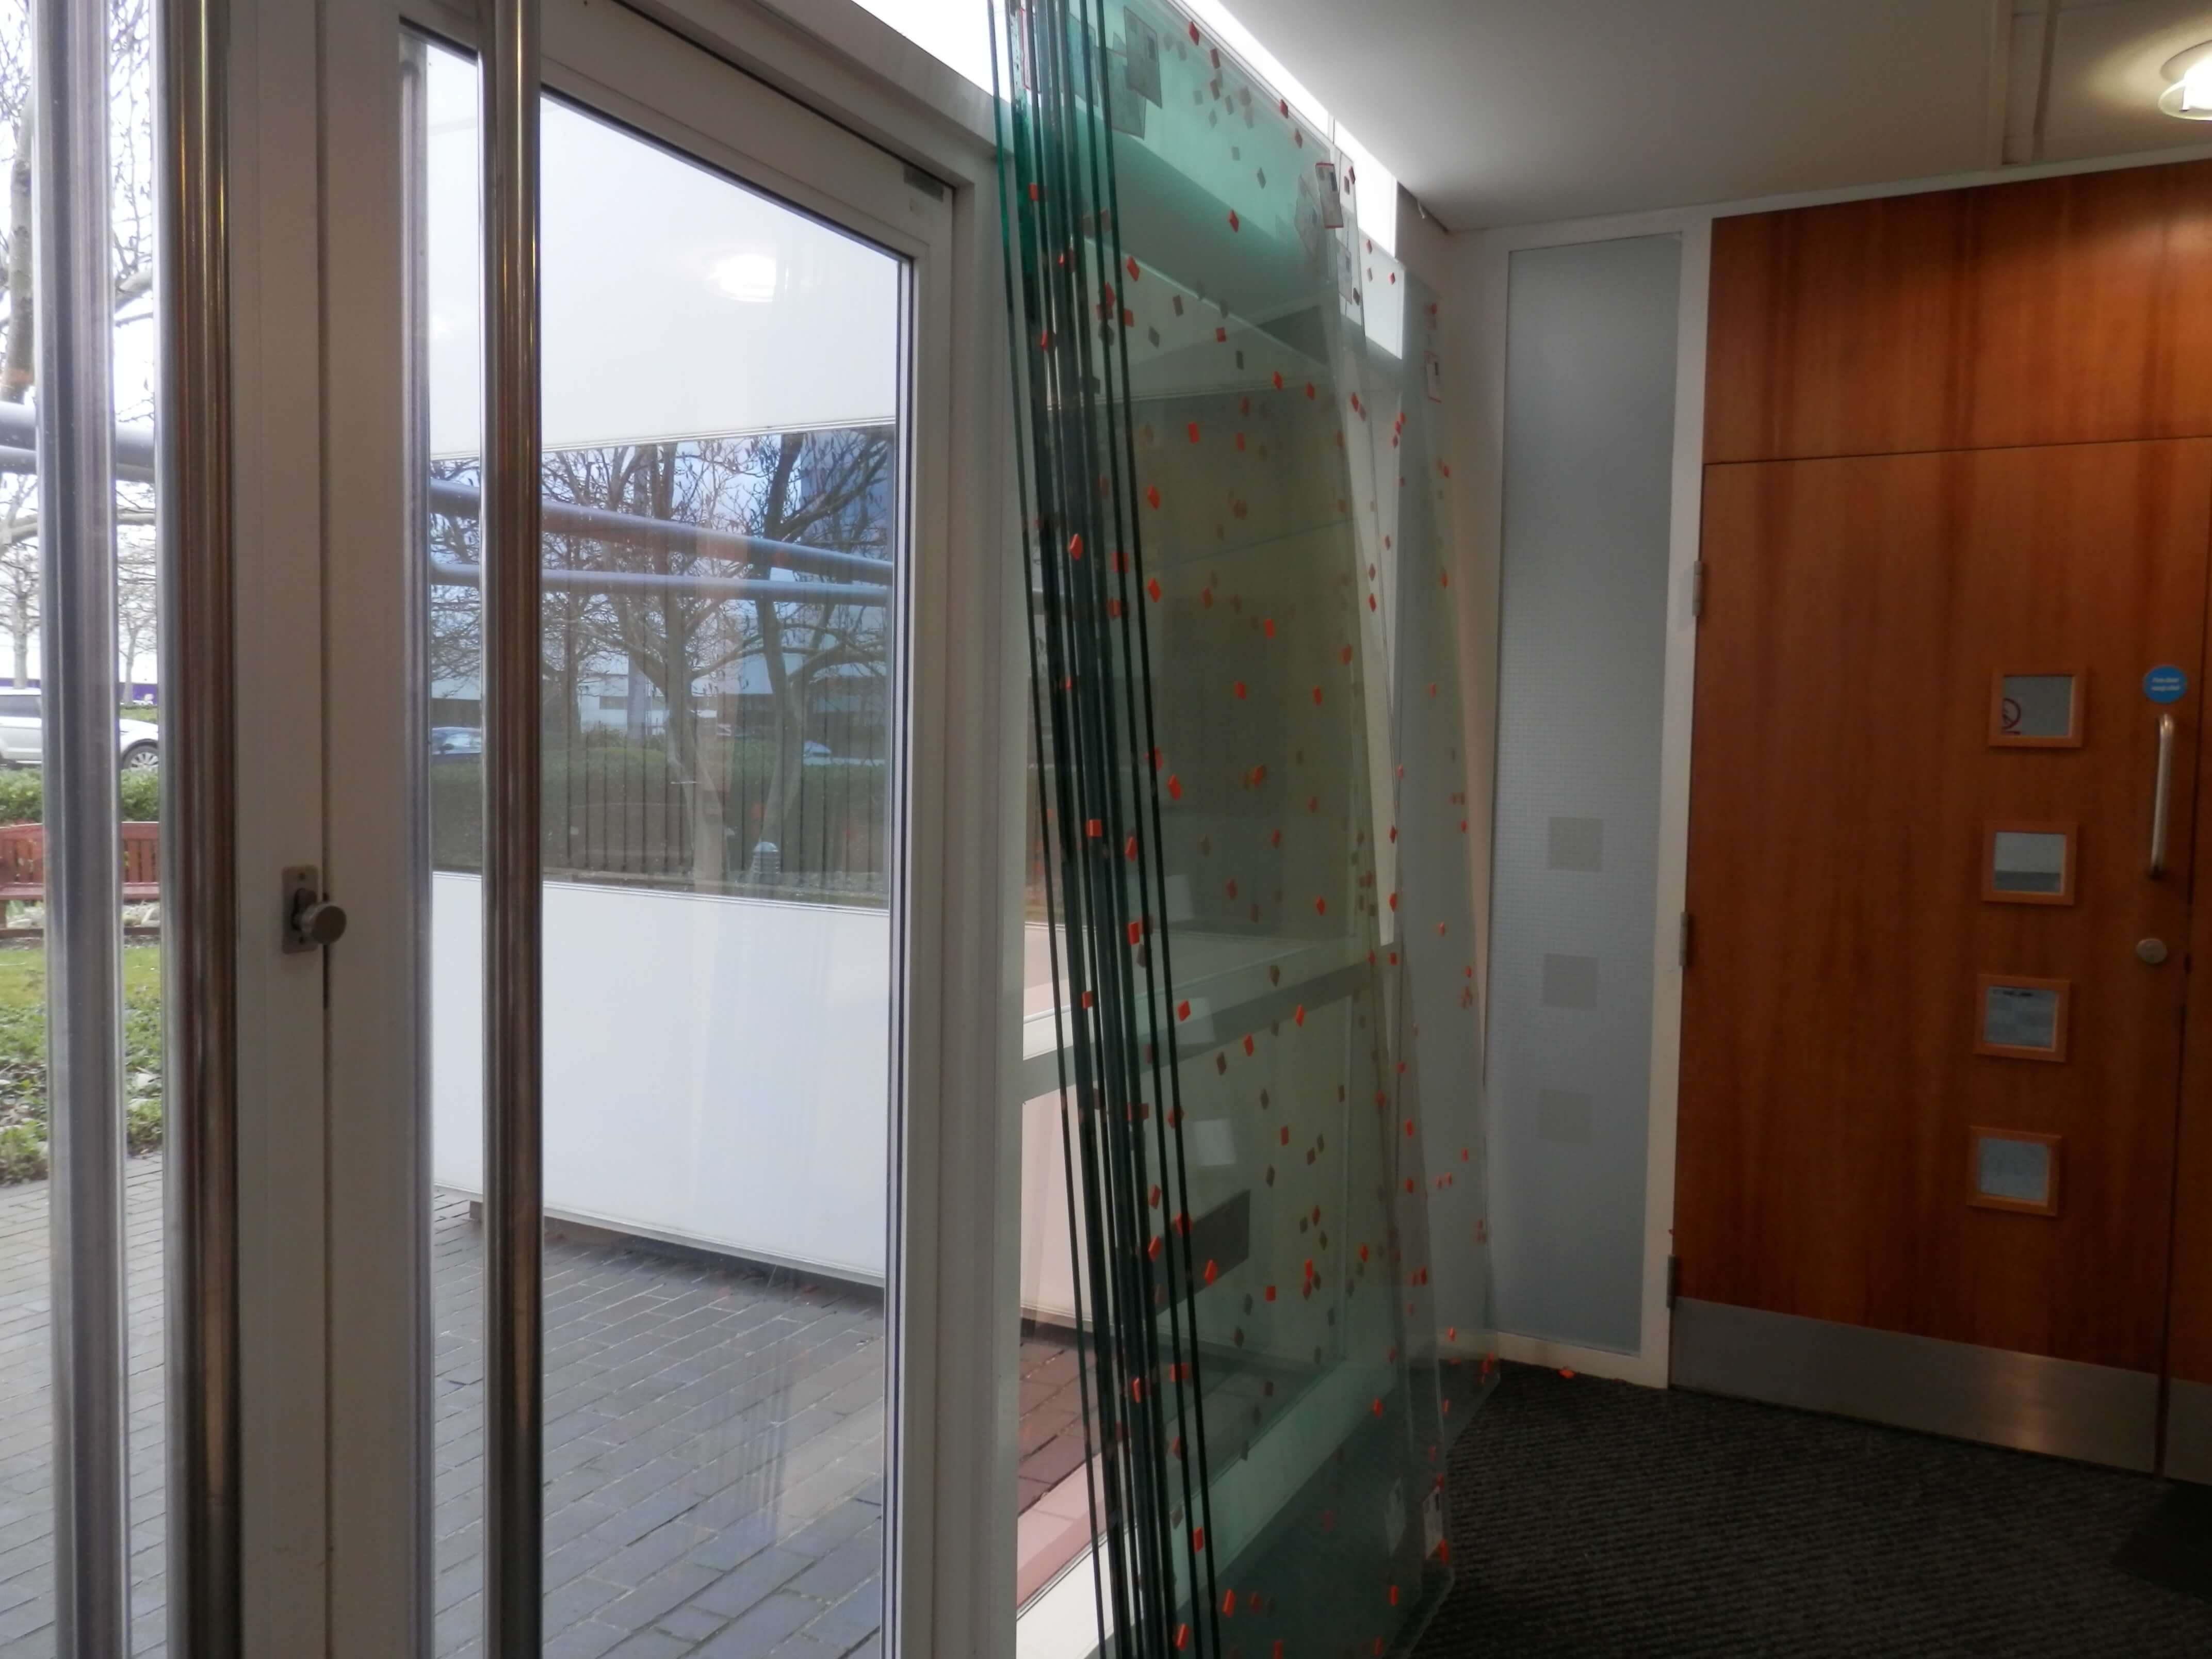 Lots of glass sheets to go in the glass partitioning.